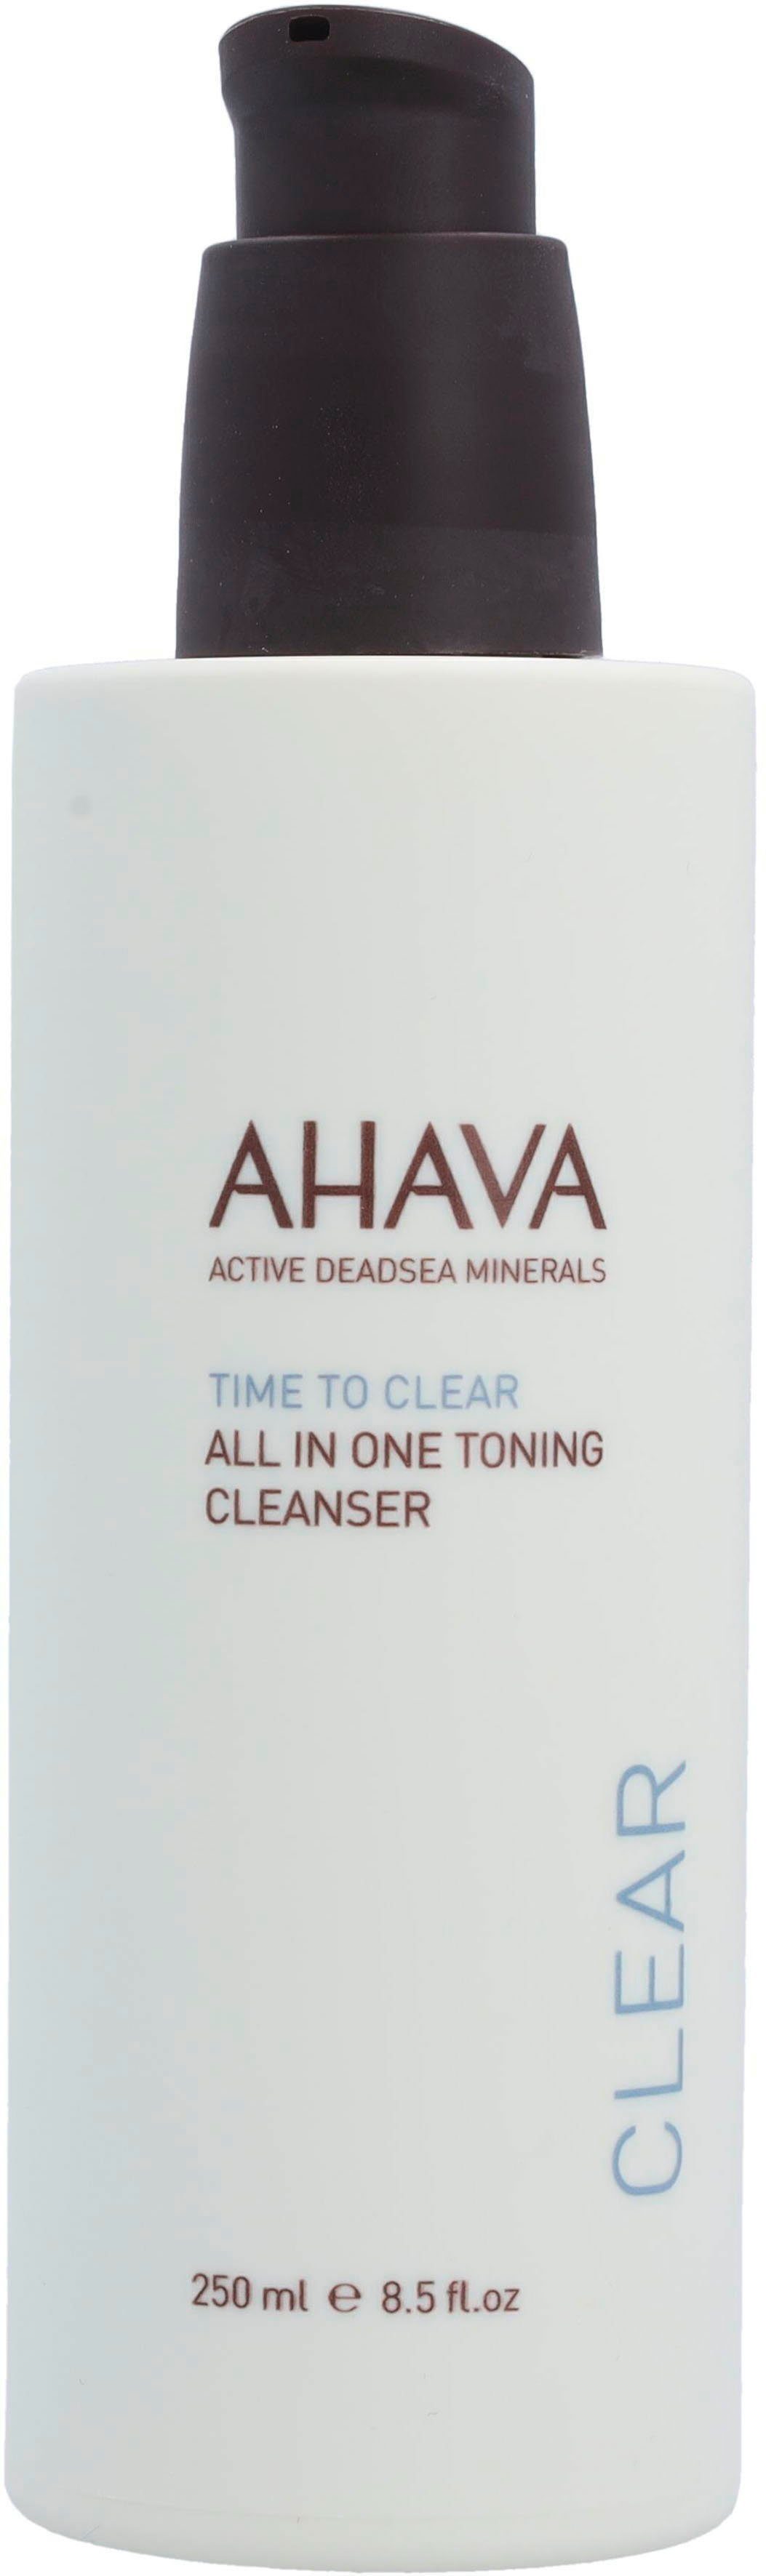 Time Gesichts-Reinigungslotion Clear To Cleanser In Toning All One AHAVA